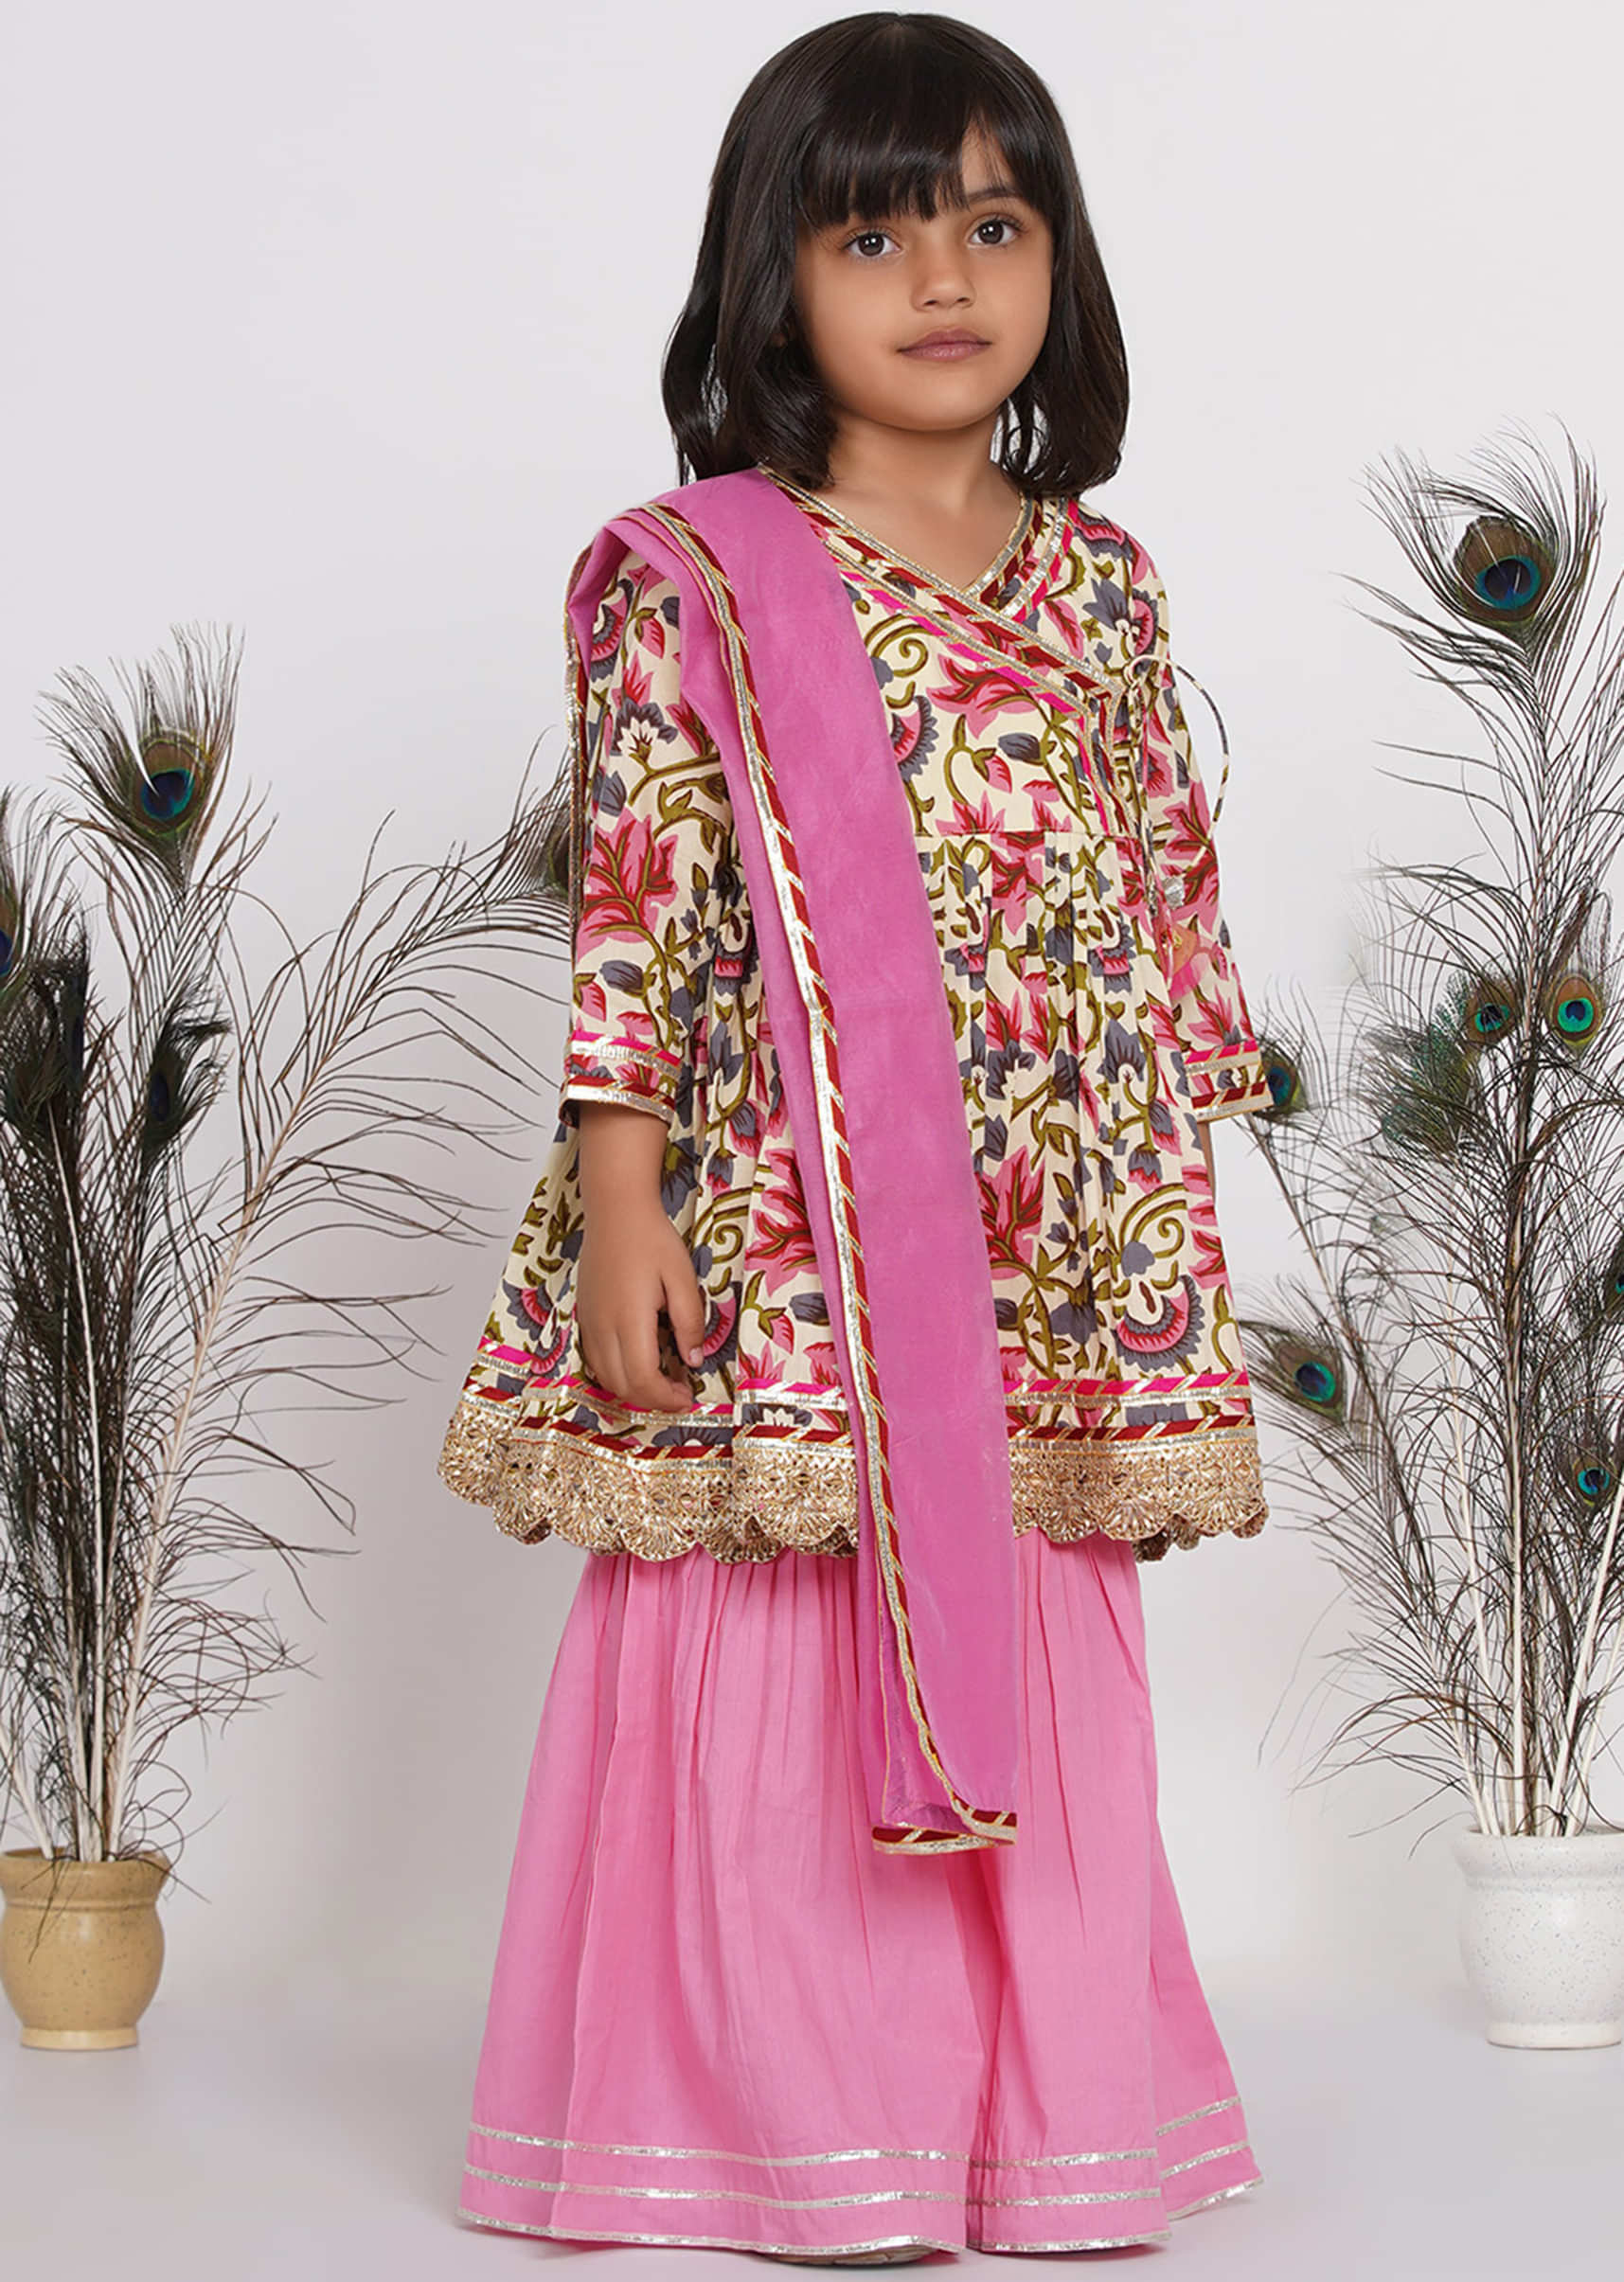 Kalki Girls Pink Angarkha Suit With Ghunghroo and Tassel work